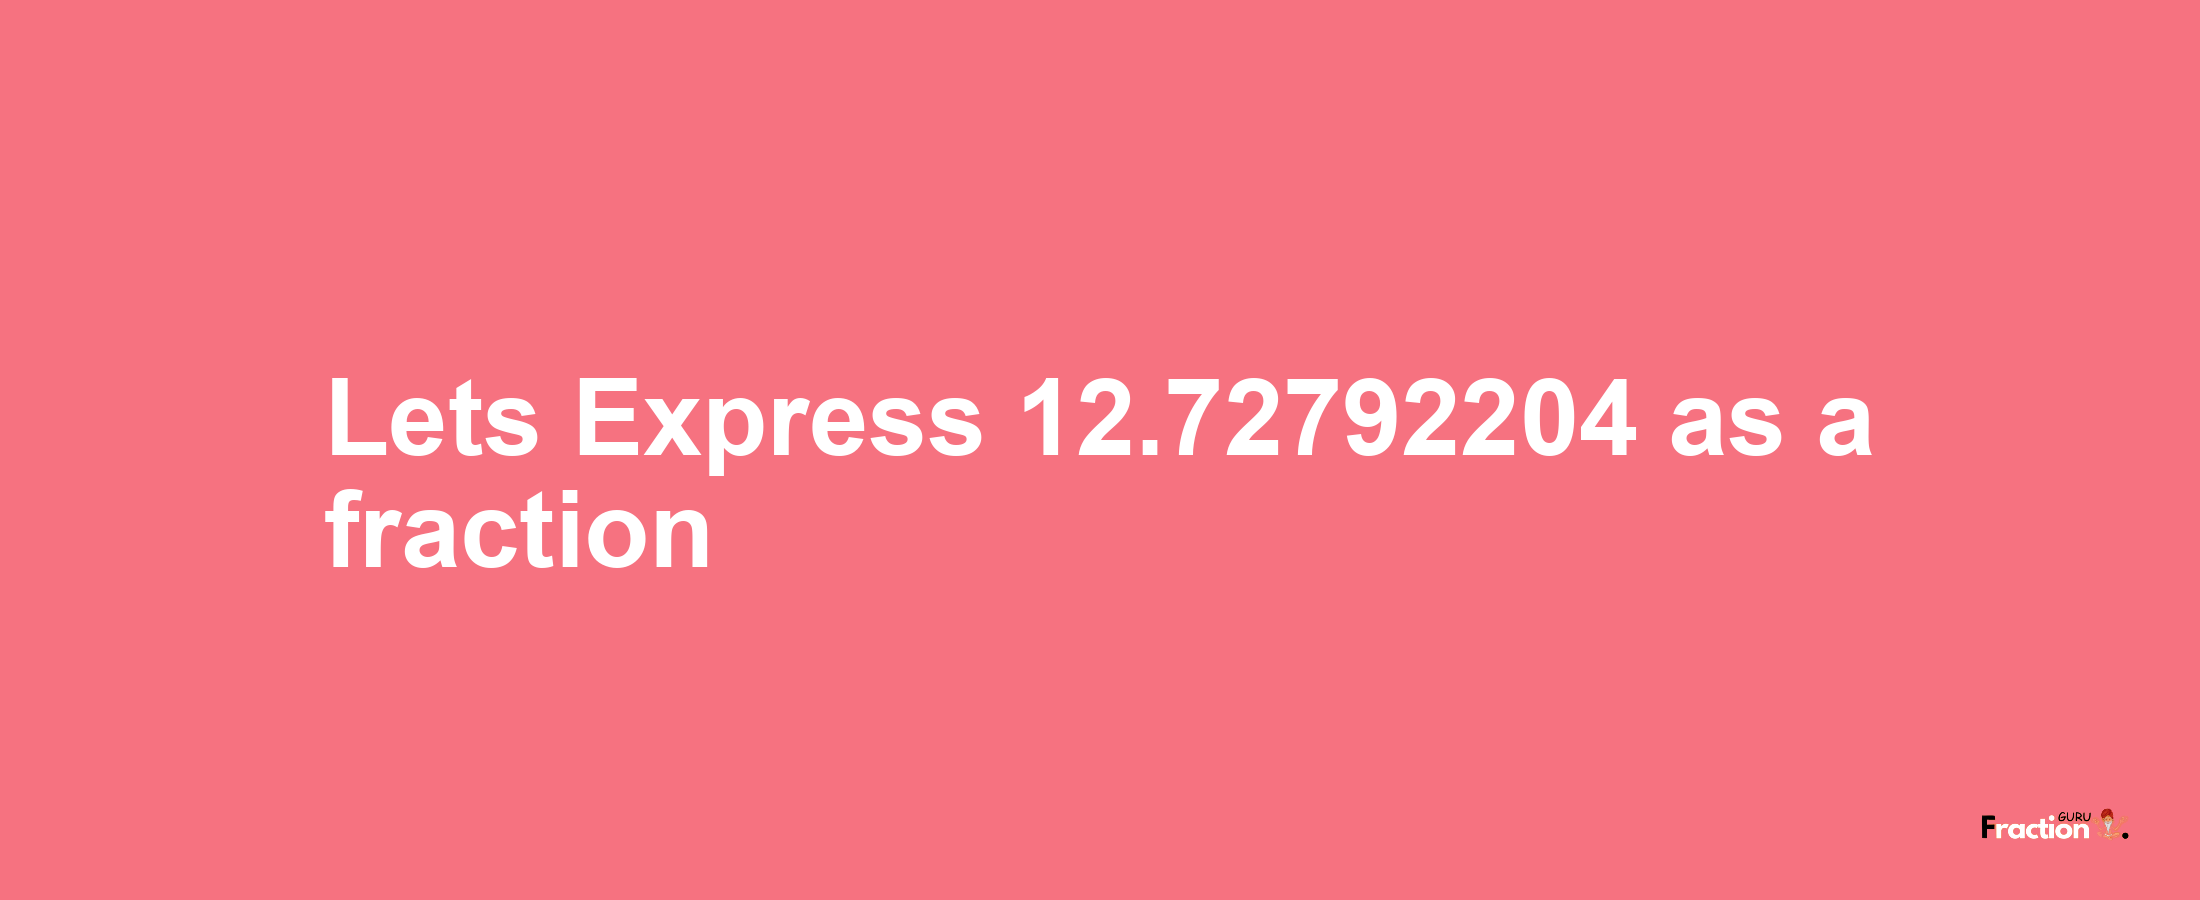 Lets Express 12.72792204 as afraction